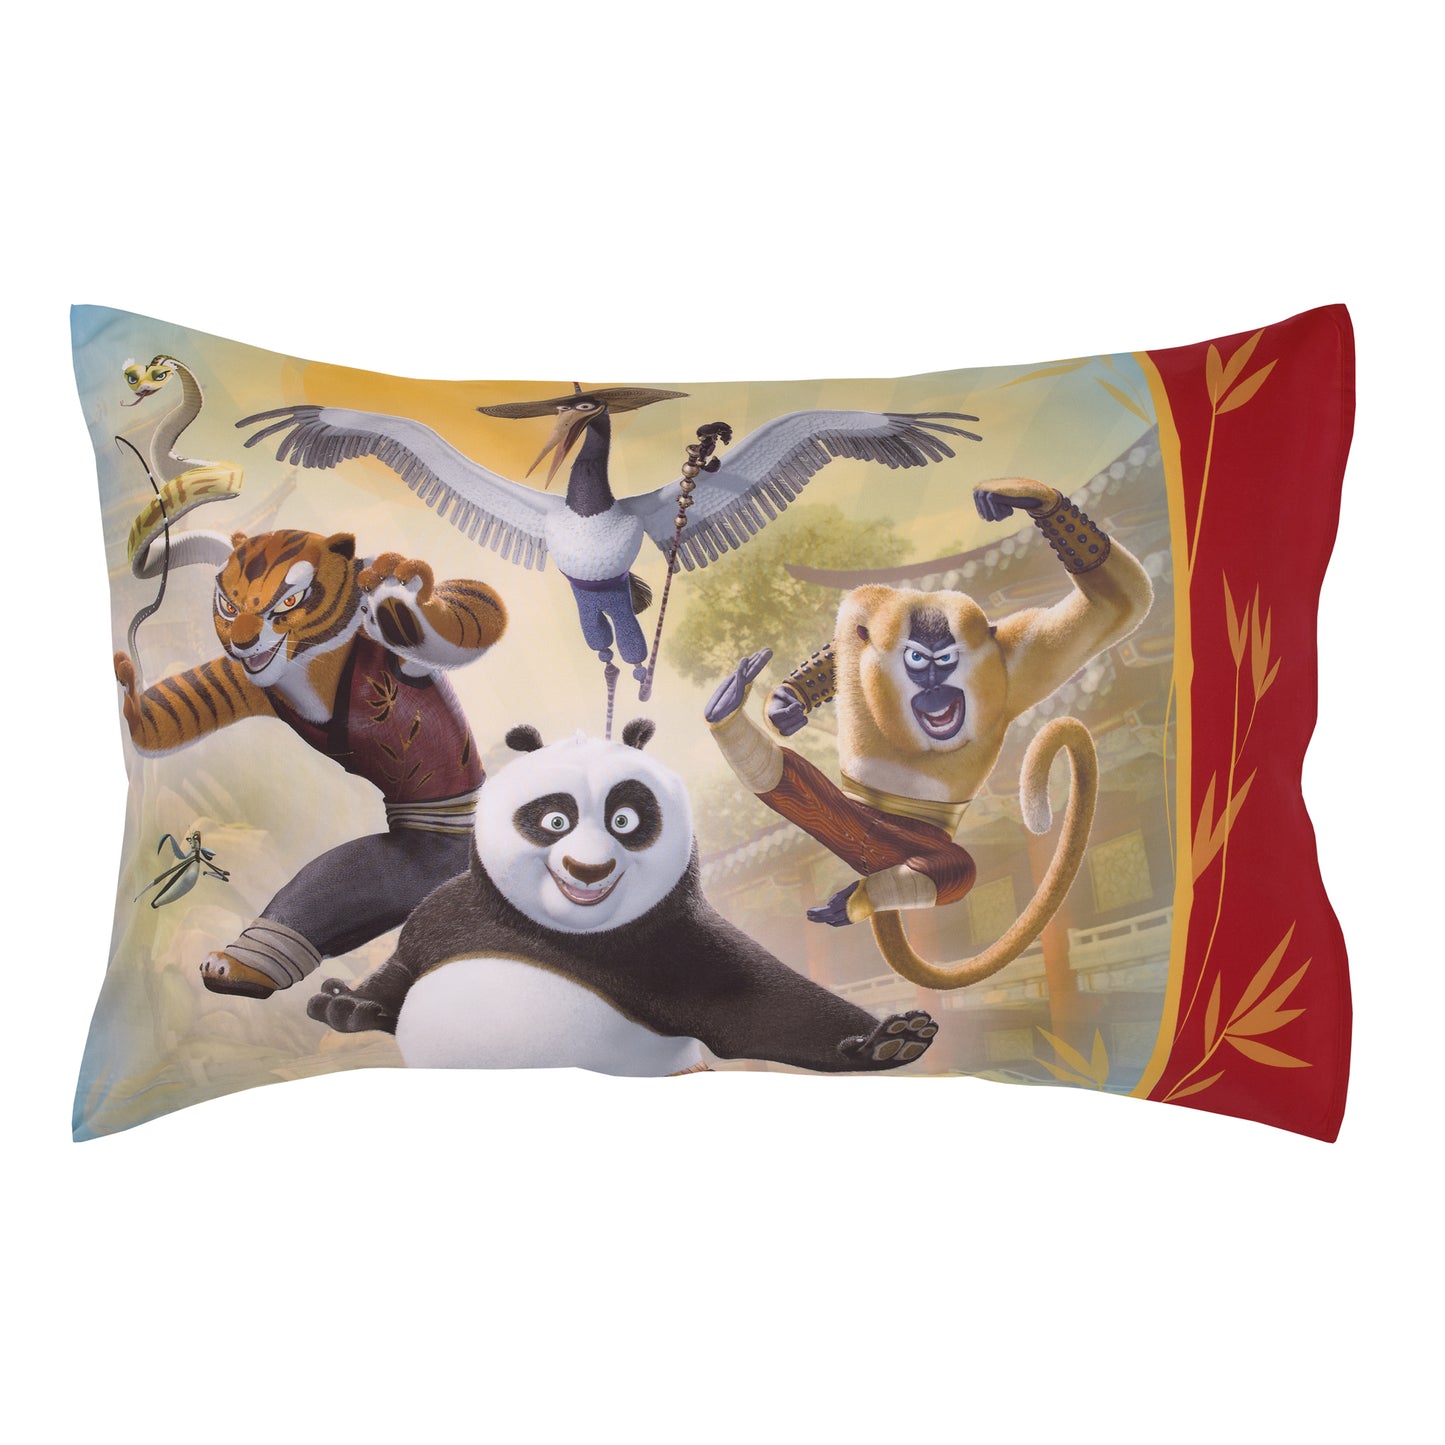 DreamWorks Kung Fu Panda Dragon Warrior Red and Gold Po and Friends 4 Piece Toddler Bed Set - Comforter, Fitted Bottom Sheet, Flat Top Sheet, and Reversible Pillowcase